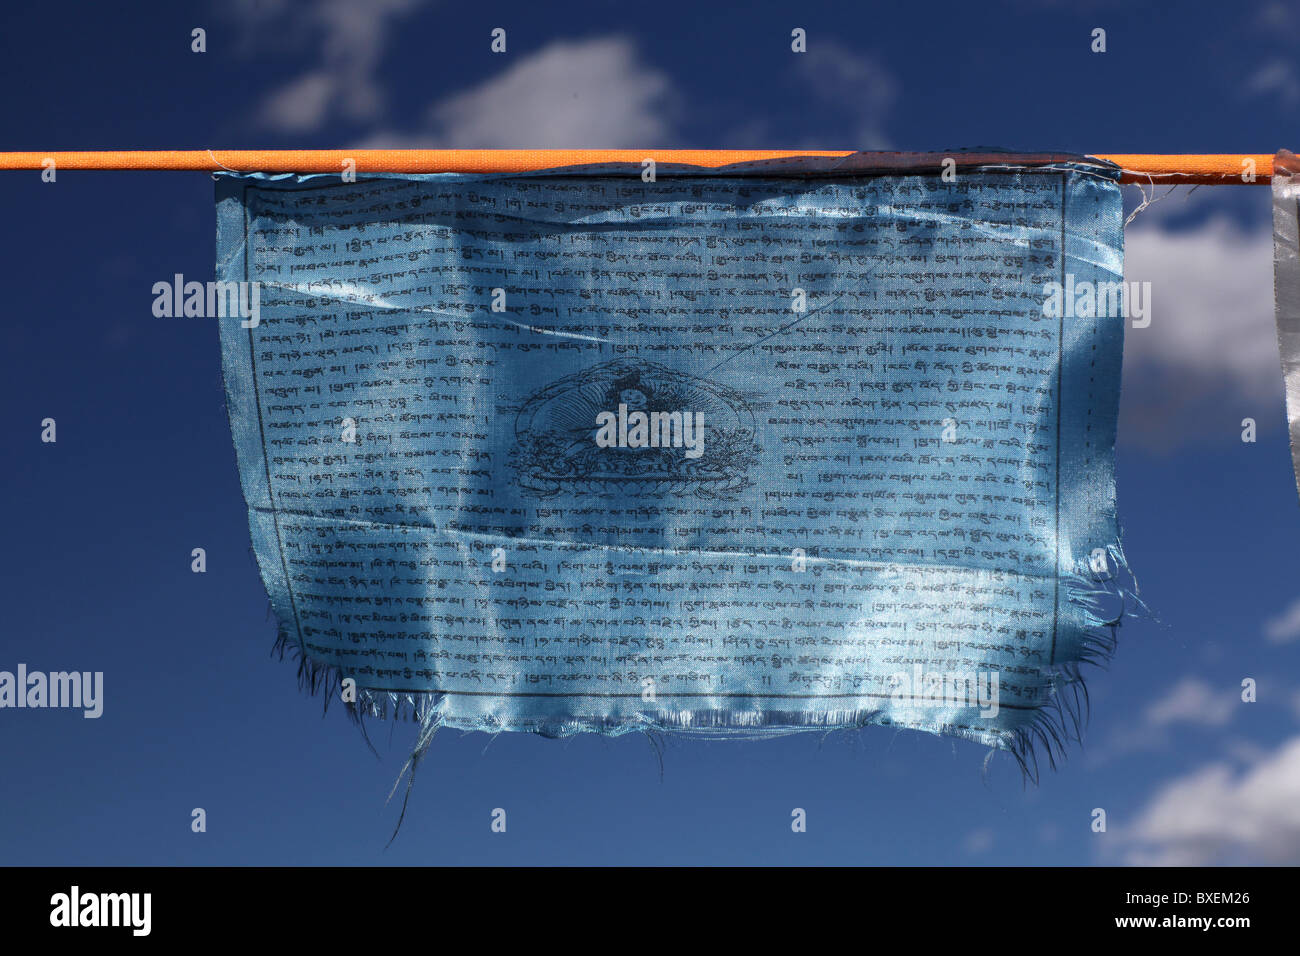 A blue prayer flag in Tagong town centre, Sichuan province, China. Stock Photo